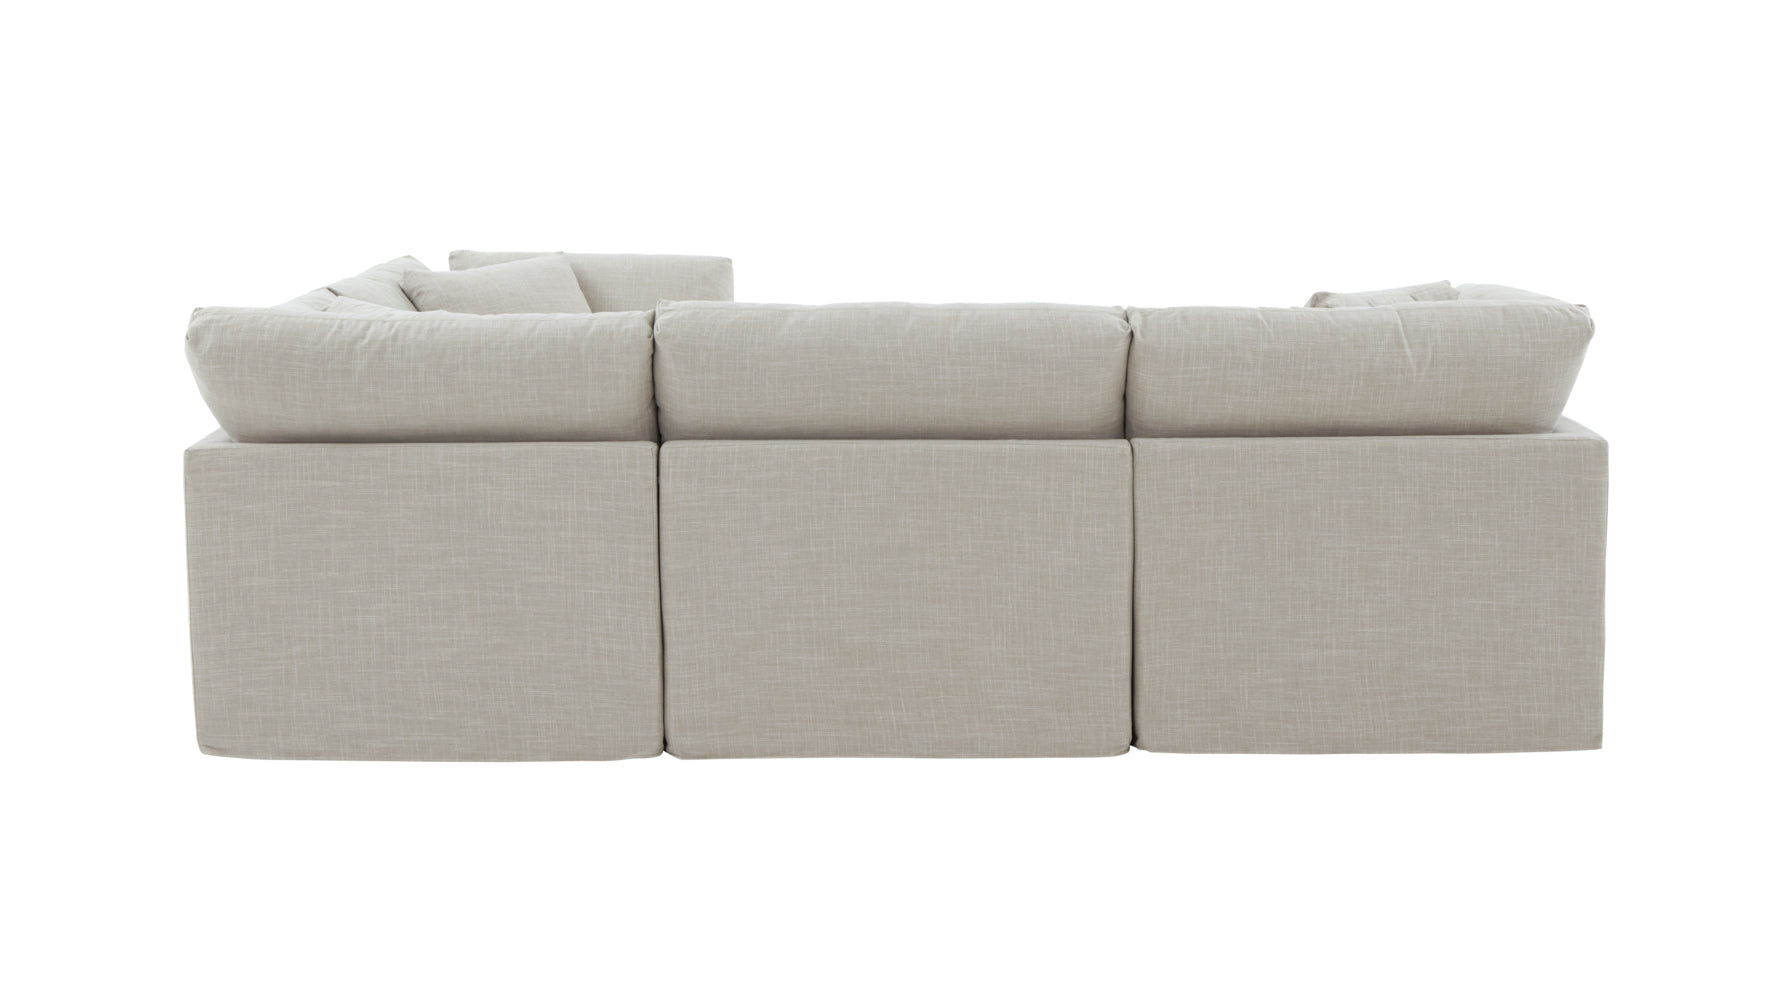 Get Together™ 4-Piece Modular Sectional Closed, Standard, Light Pebble - Image 7